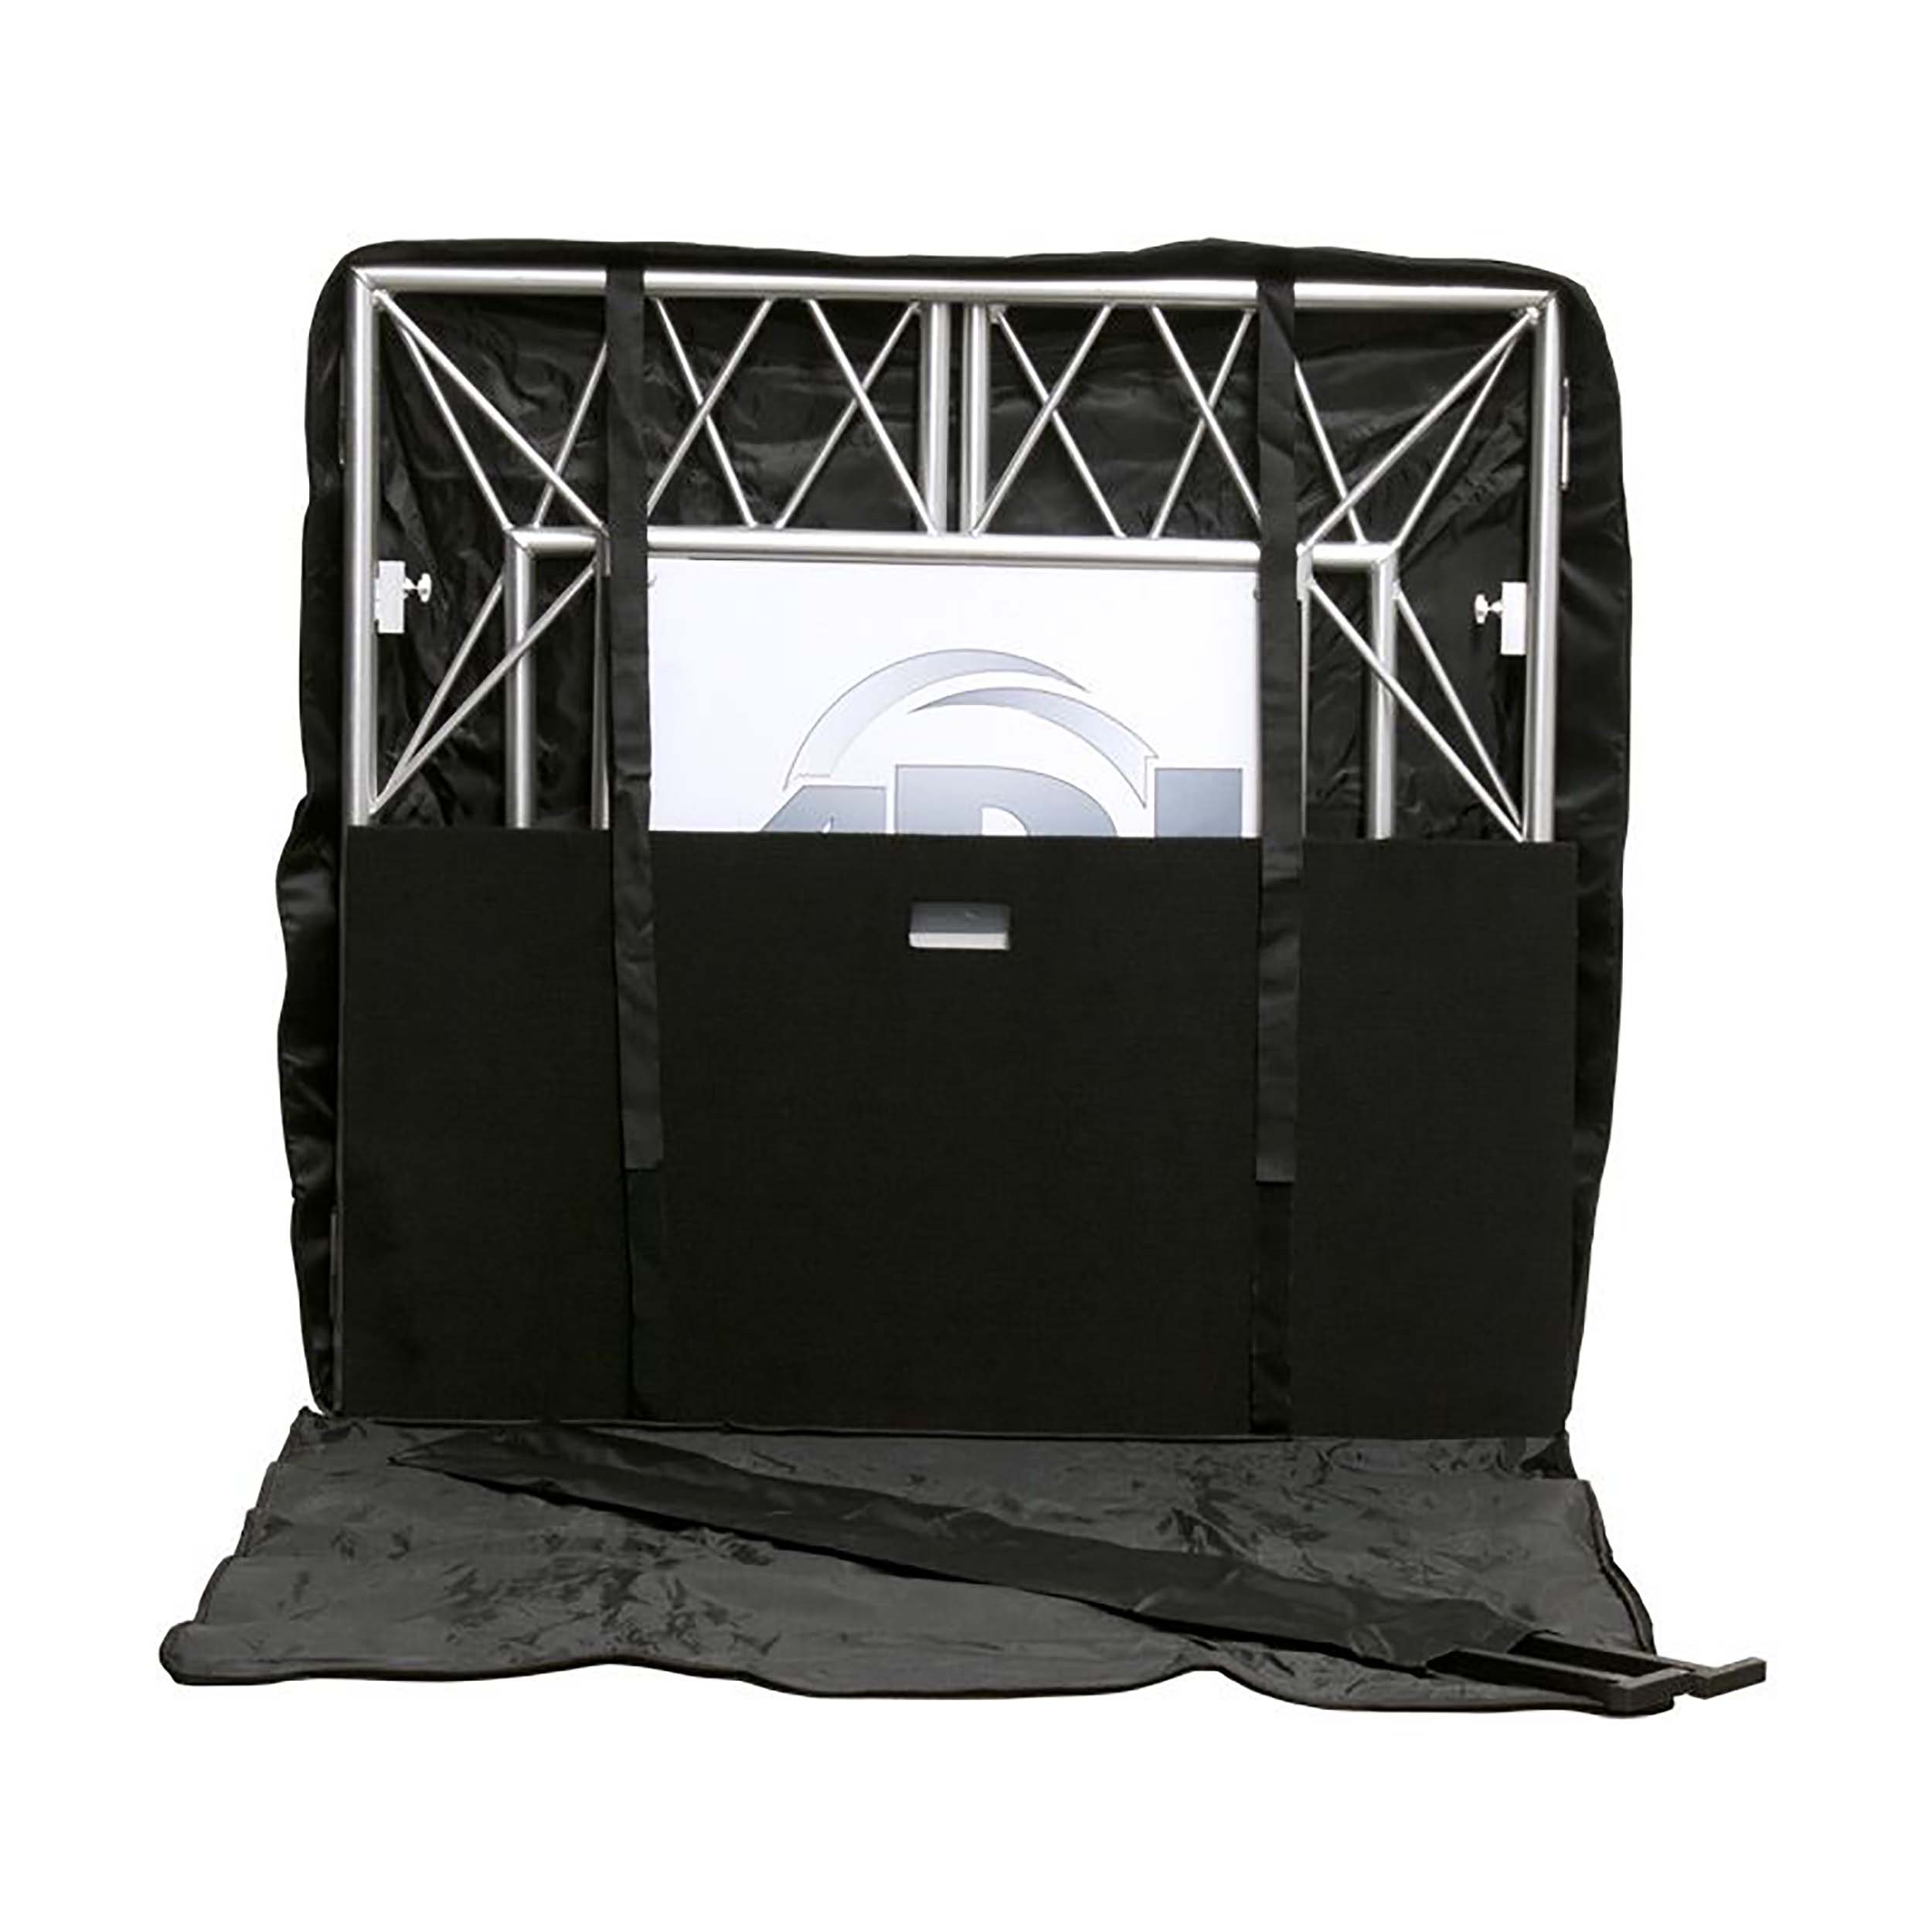 ADJ PRO-ETB, Black Carrying Bag for Pro Event Table. by ADJ